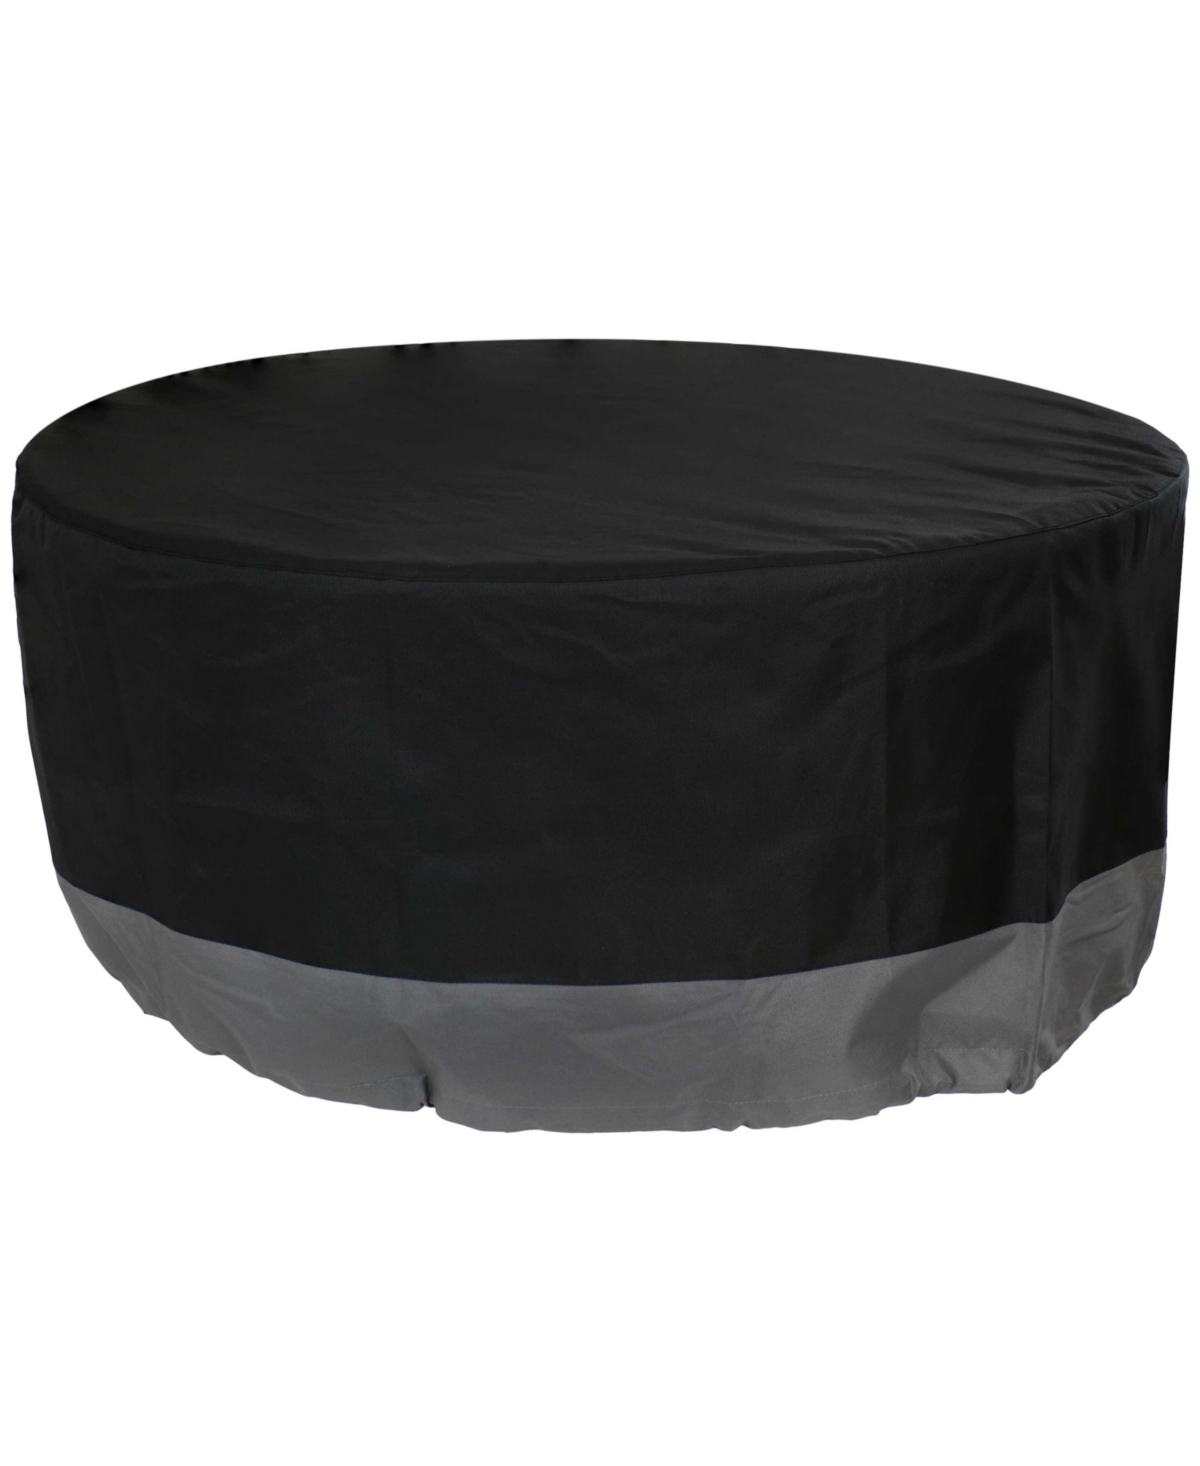 36 in 2-Tone Polyester Round Outdoor Fire Pit Cover - Gray/Black - Black